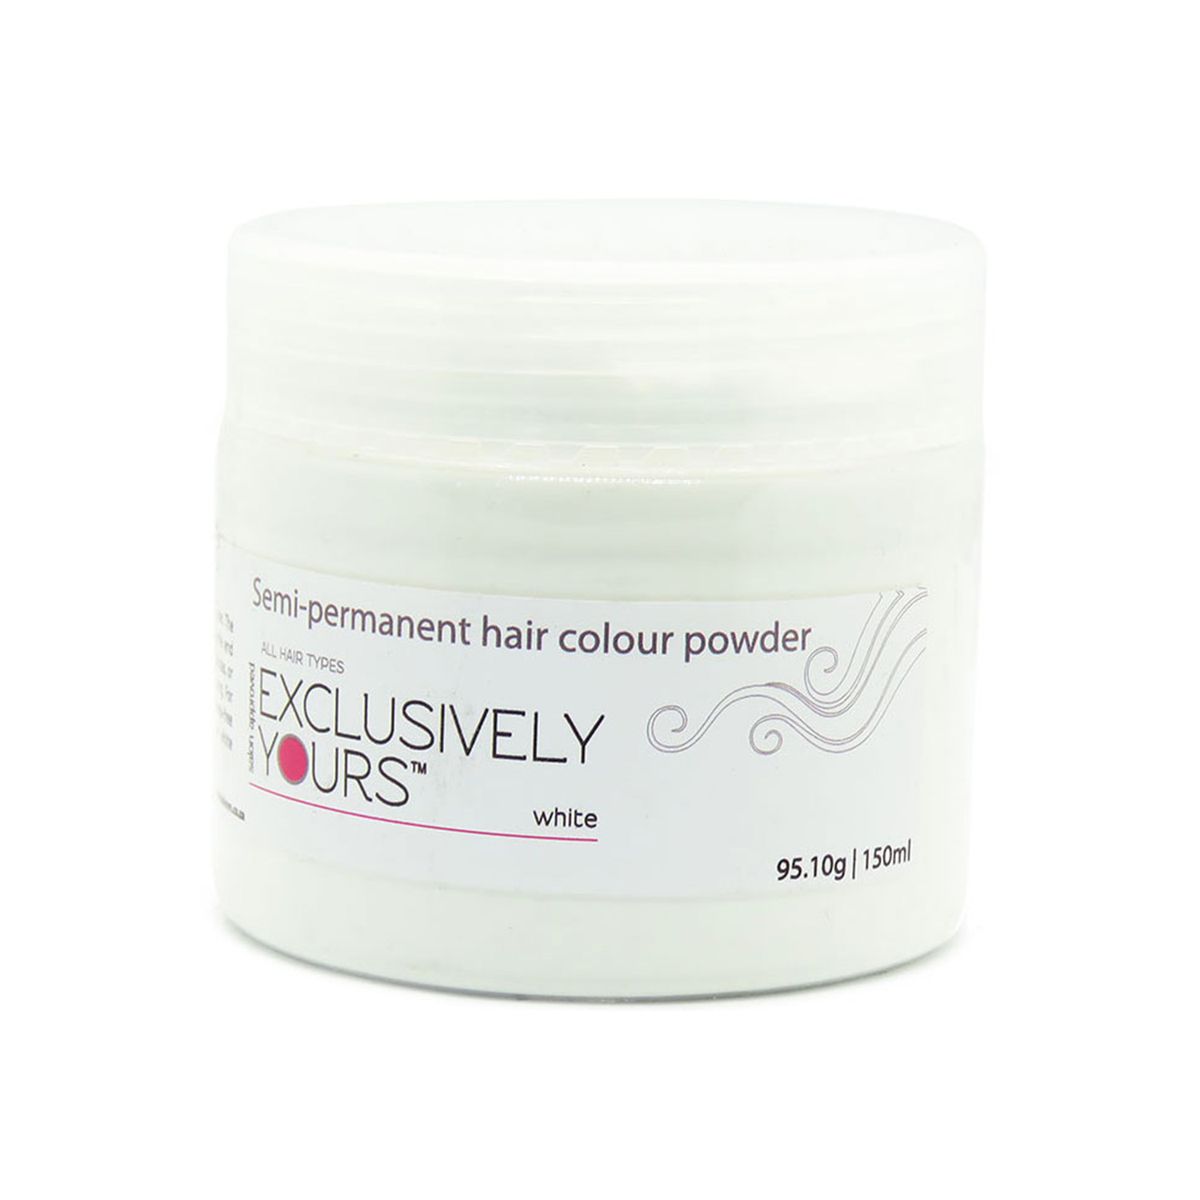 Exclusively Yours Semi-Permanent Hair Colour Powder: White 95g | Buy Online  in South Africa 